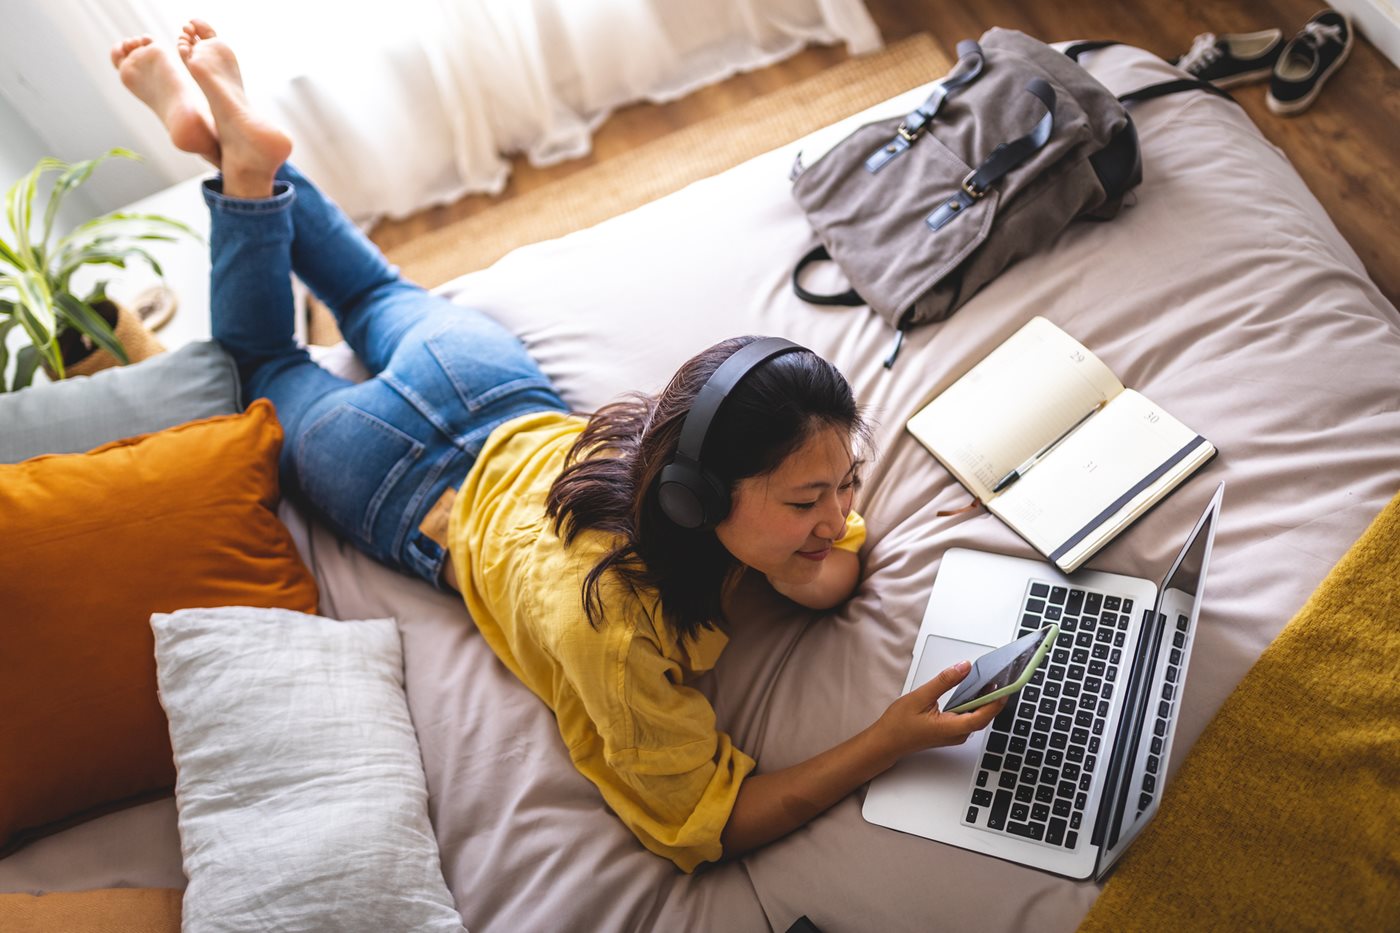 College student chills on her bed while on her laptop and wearing headphones